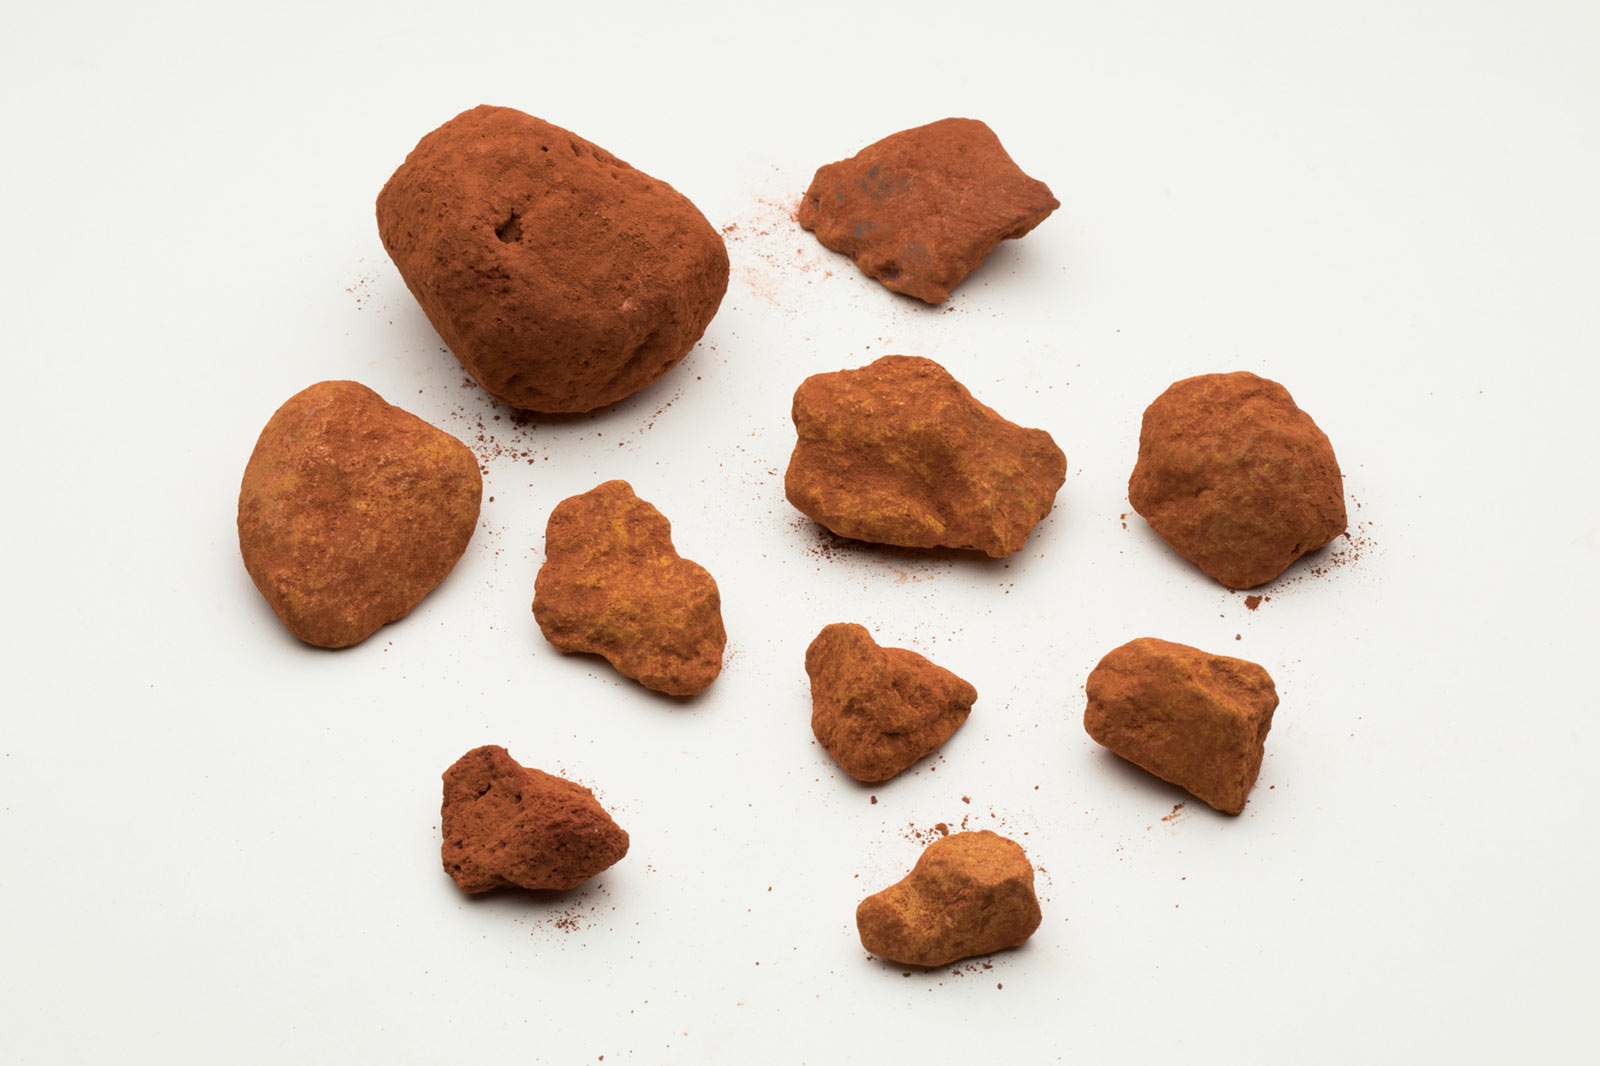 Pieces of red powdery rock on a white background.